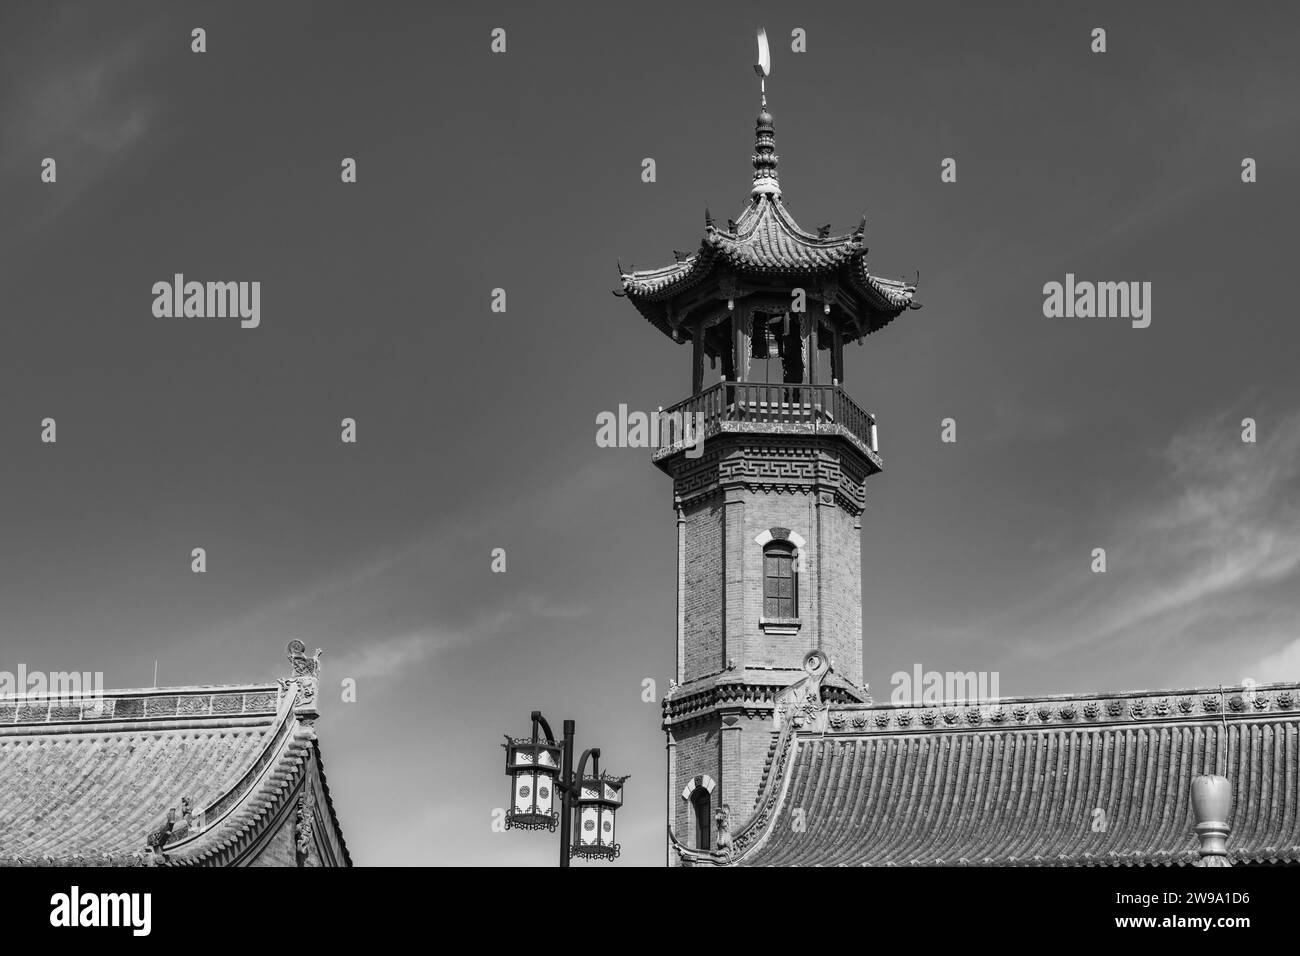 28.09.2021. HOHHOT, CHINA: Vertical image of minaret of The Great Mosque of Hohhot (a mosque in Huimin District, Hohhot, Inner Mongolia, China. It is Stock Photo